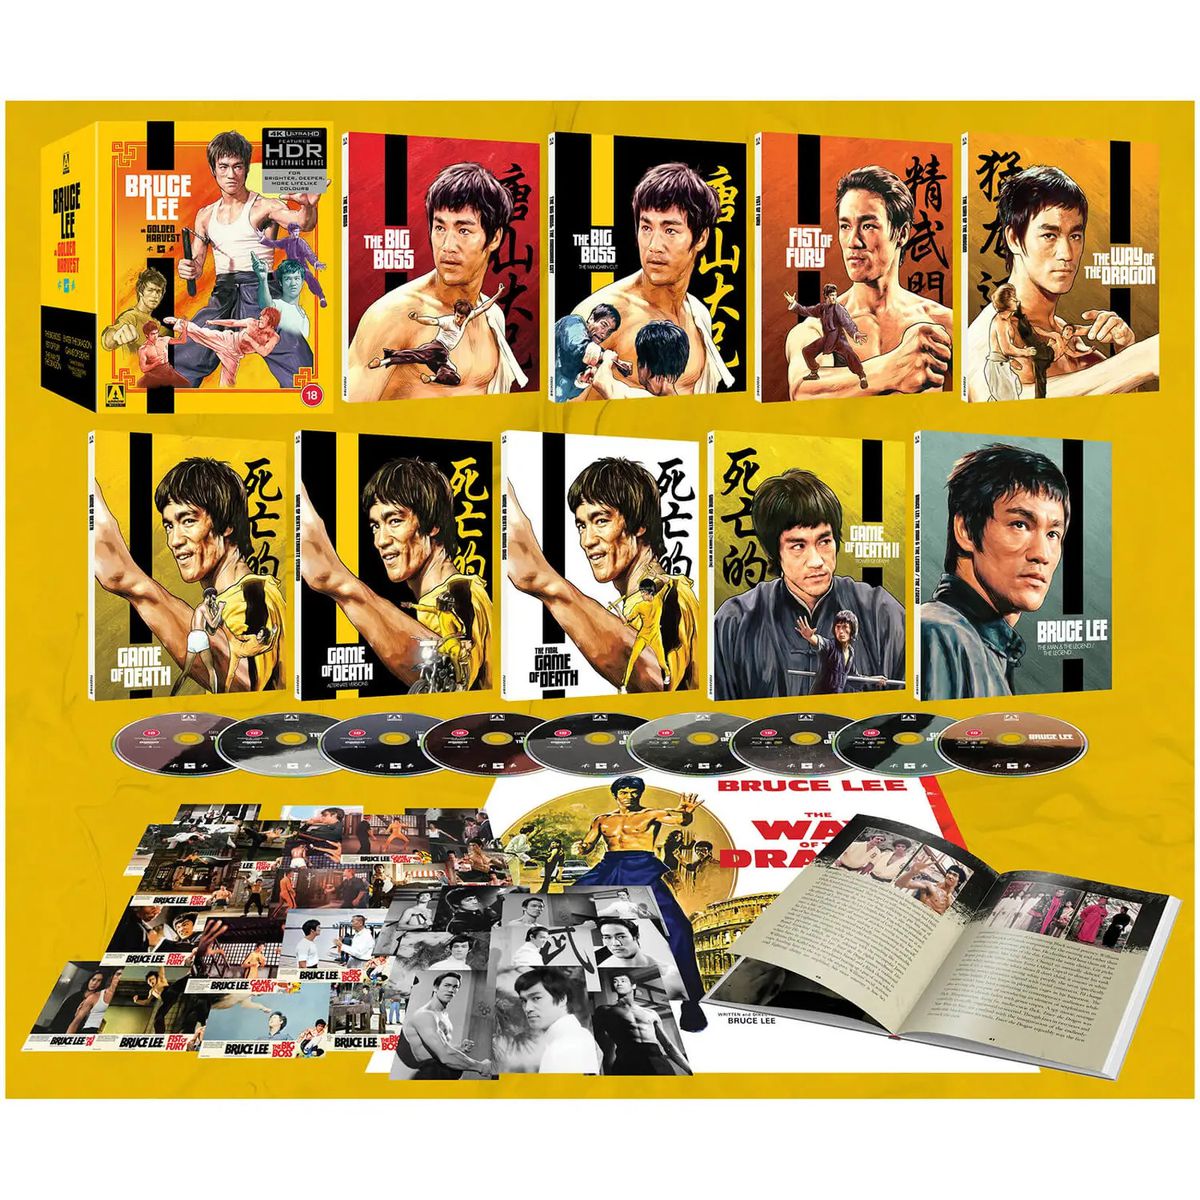 A box set of Bruce Lee films presented by Arrow UK. A large box contains lots of smaller boxes, discs, art, a book, and a poster.